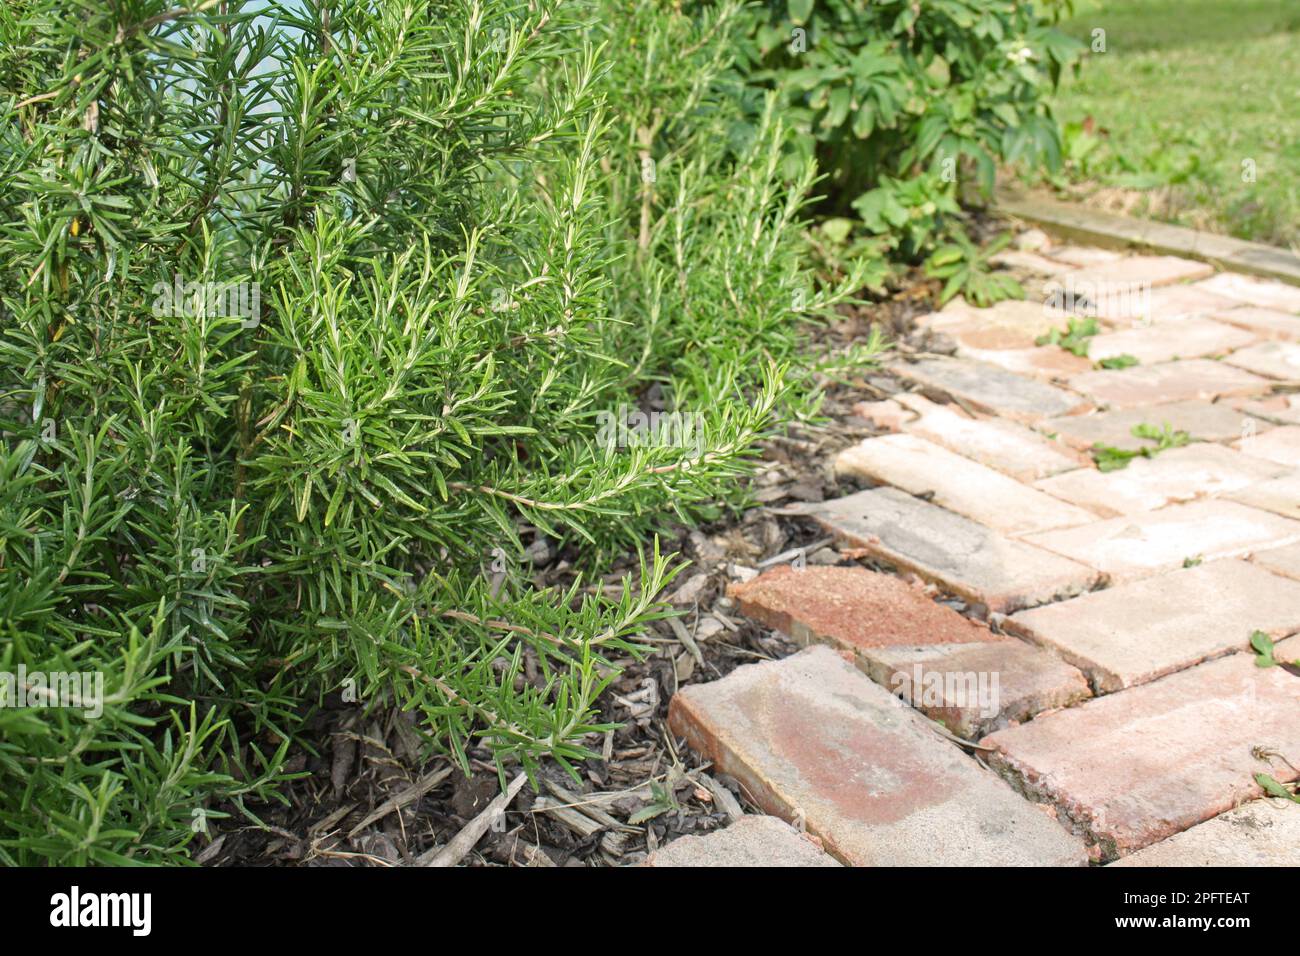 Rosemary (Rosmarinus officinalis) leaves, growing on the edge of a brick garden path, Suffolk, England, United Kingdom Stock Photo